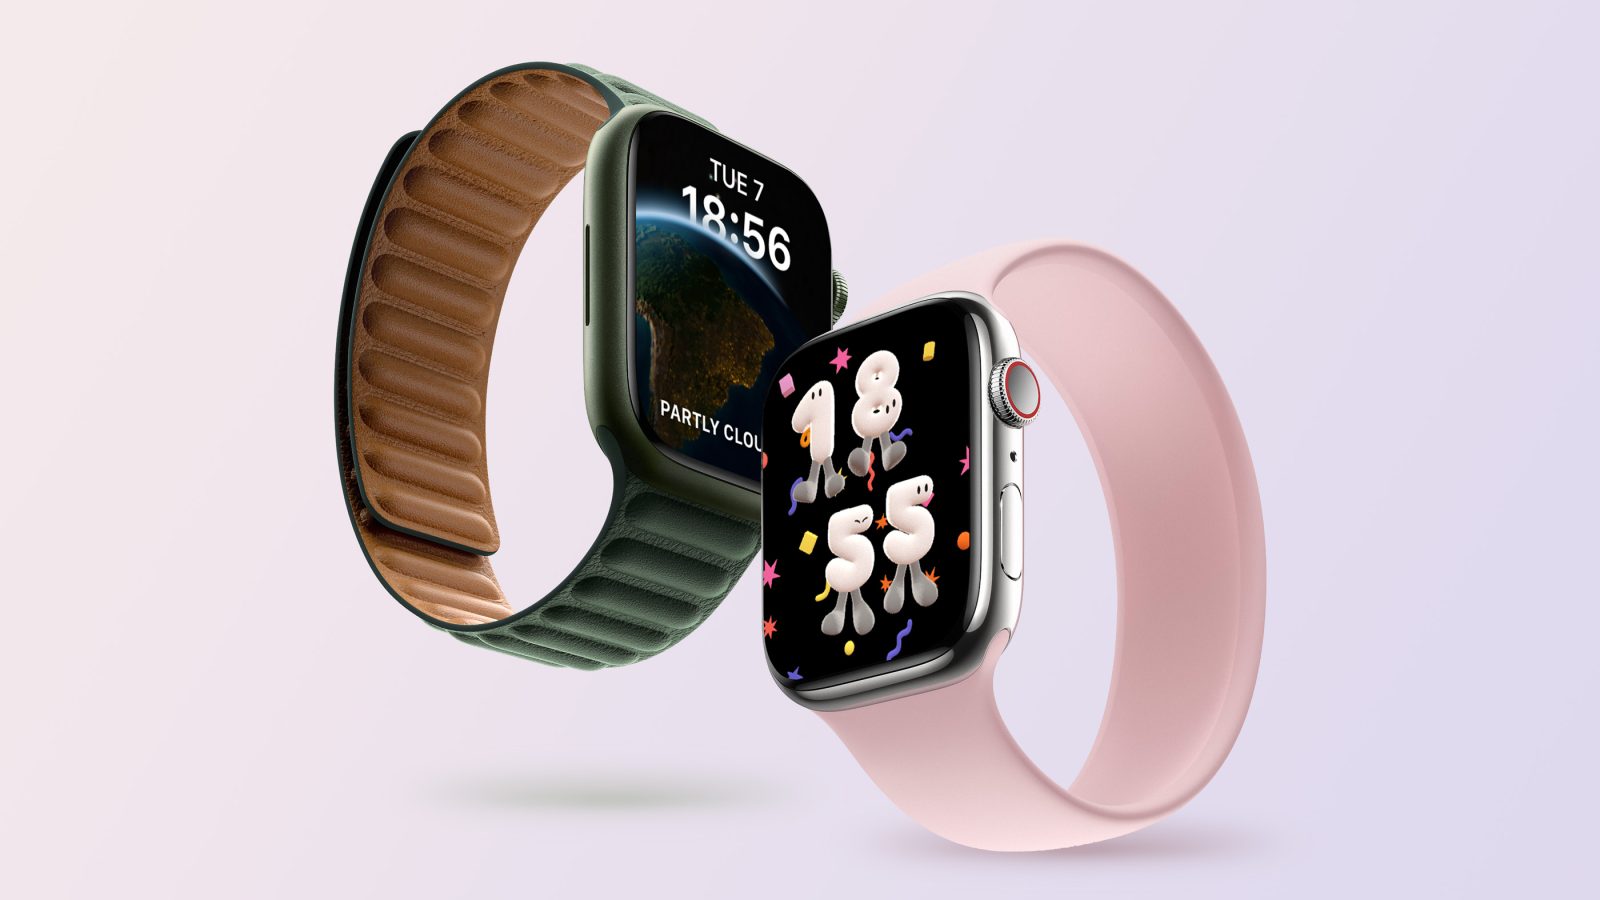 Apple Watch series 7 watch faces